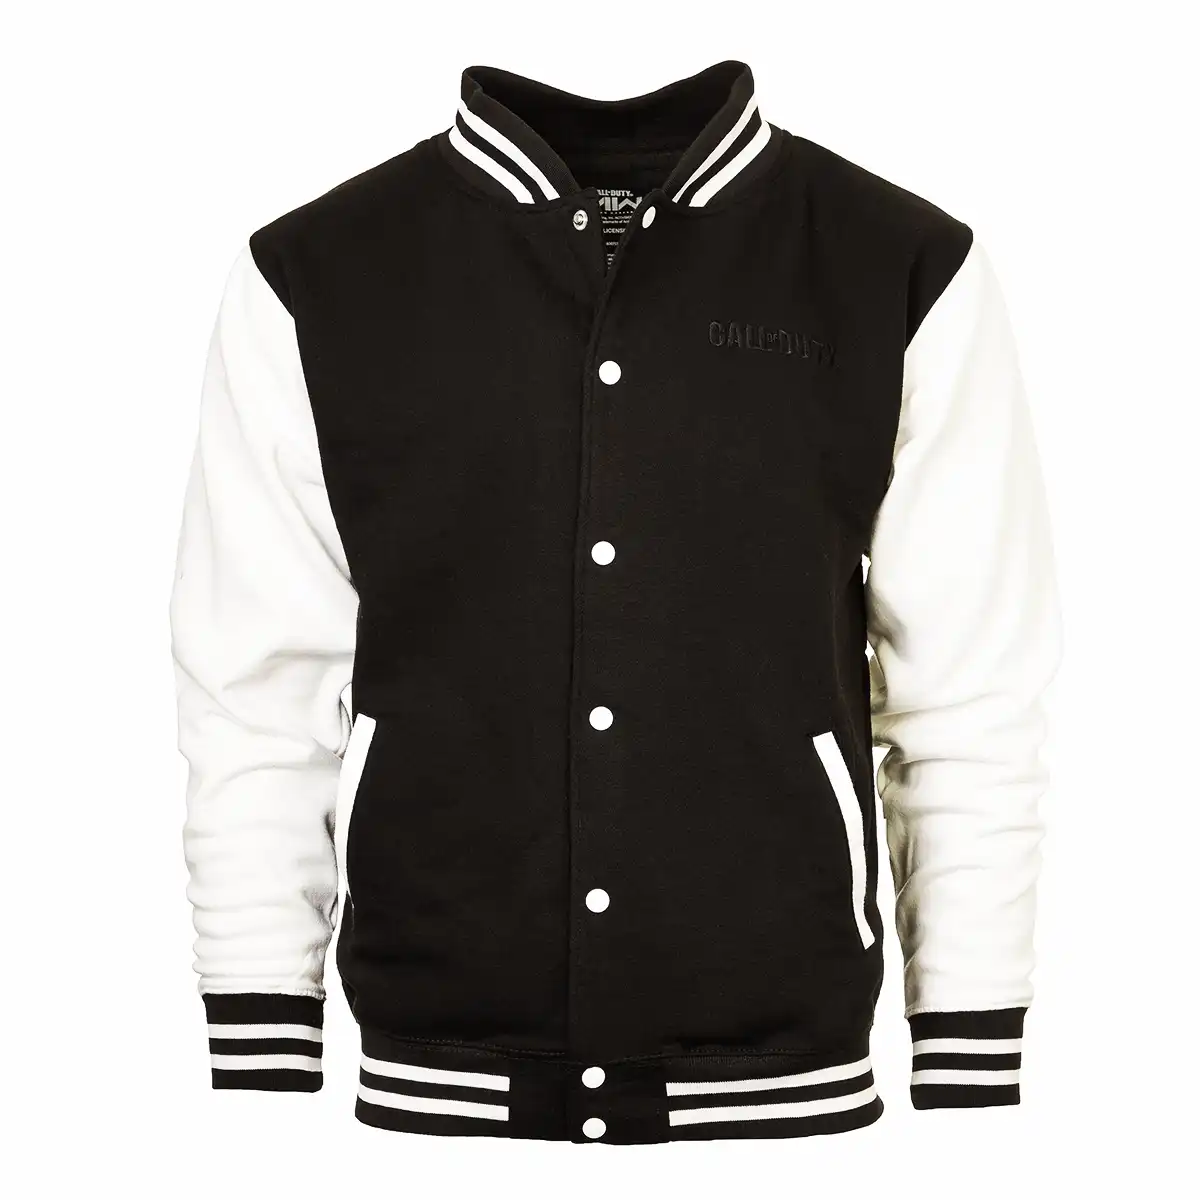 Call of Duty College Jacket "Ghost" Black/White XXL Cover